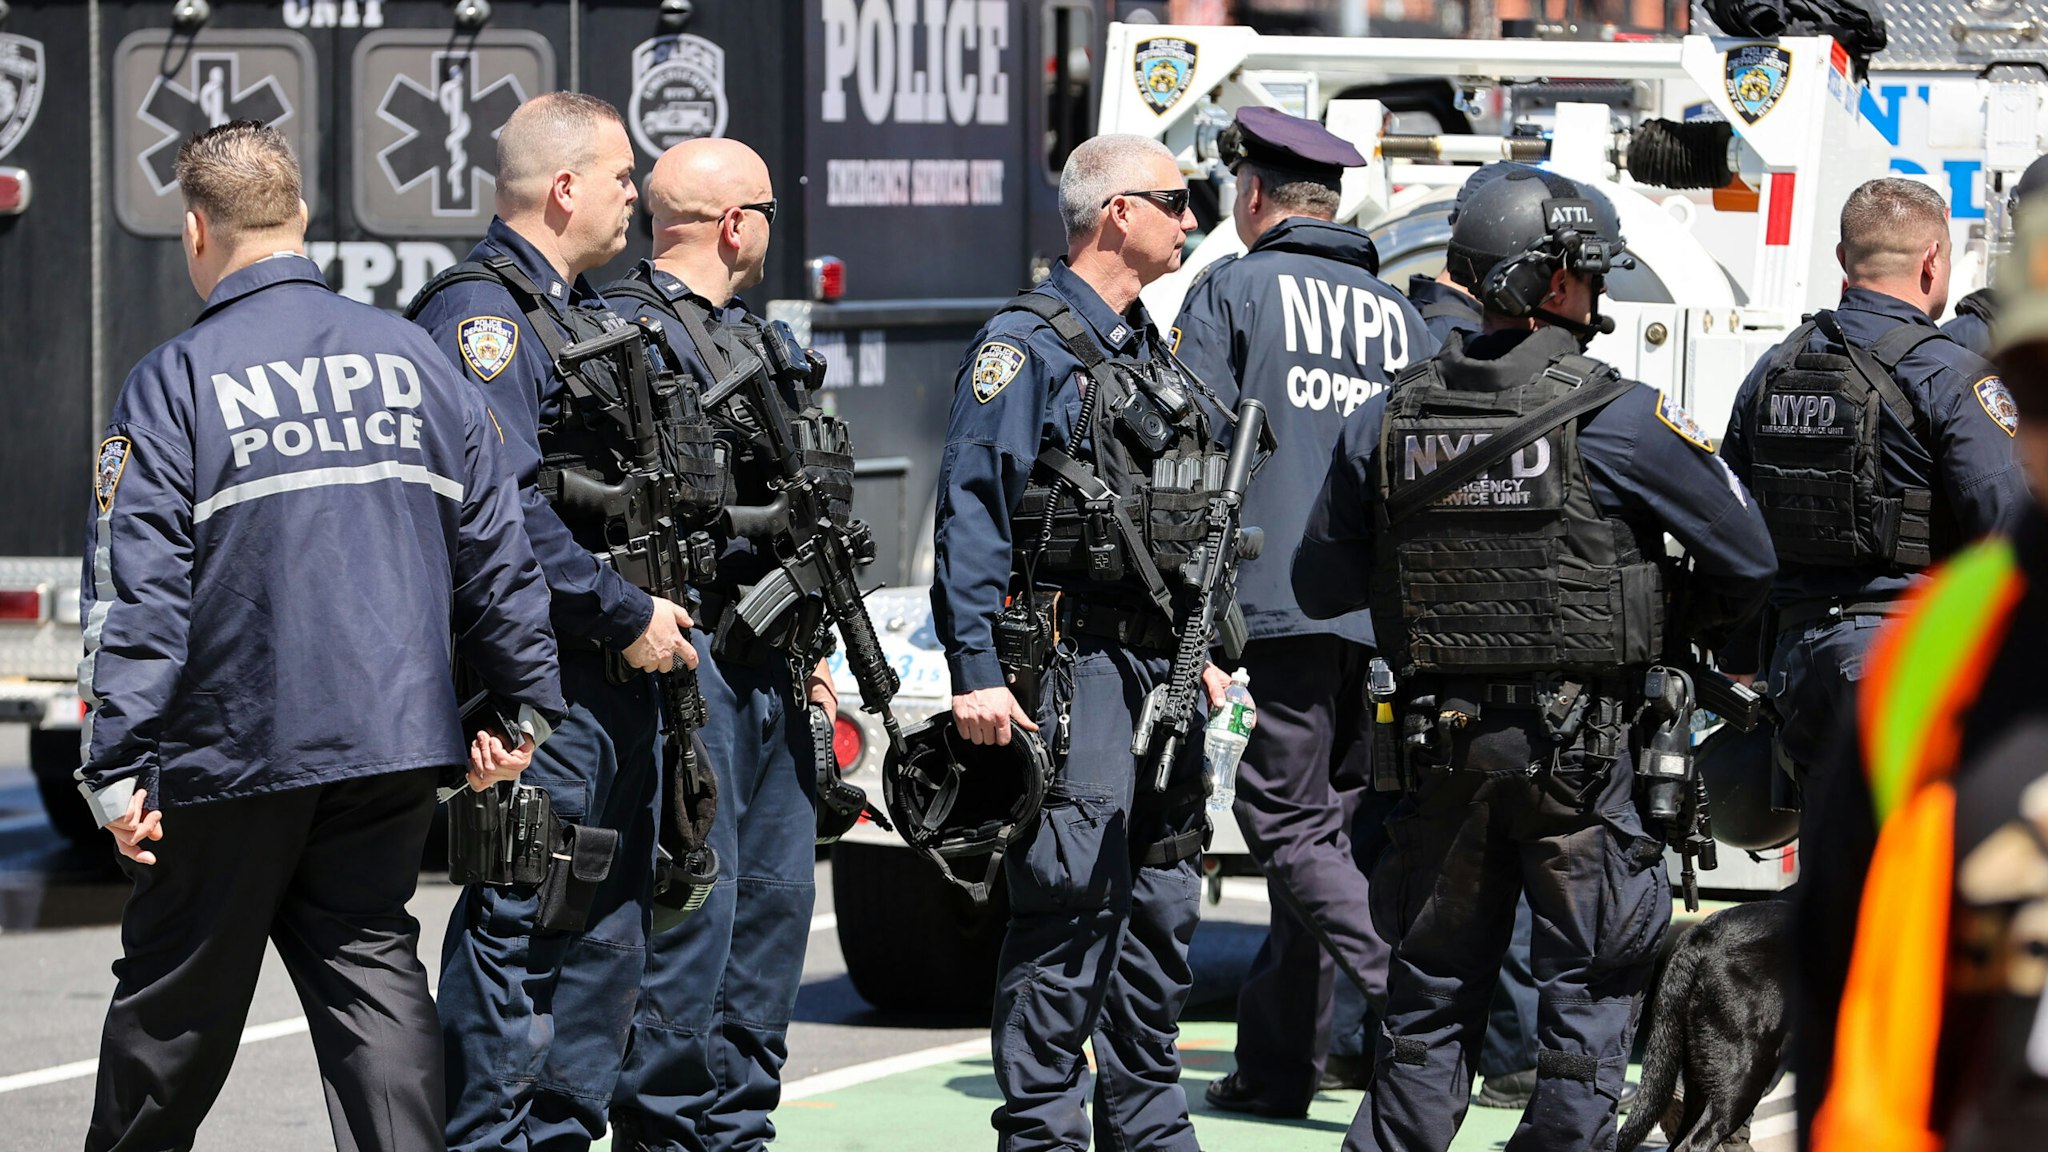 NEW YORK, USA - APRIL 12: New York City Police Department members investigate the crime scene after multiple people were shot and undetonated devices were found at a subway station in New York City, United States on April 12, 2022. Authorities said an investigation is underway and told residents to avoid the area of 36th Street and 4th Avenue in Brooklyn.